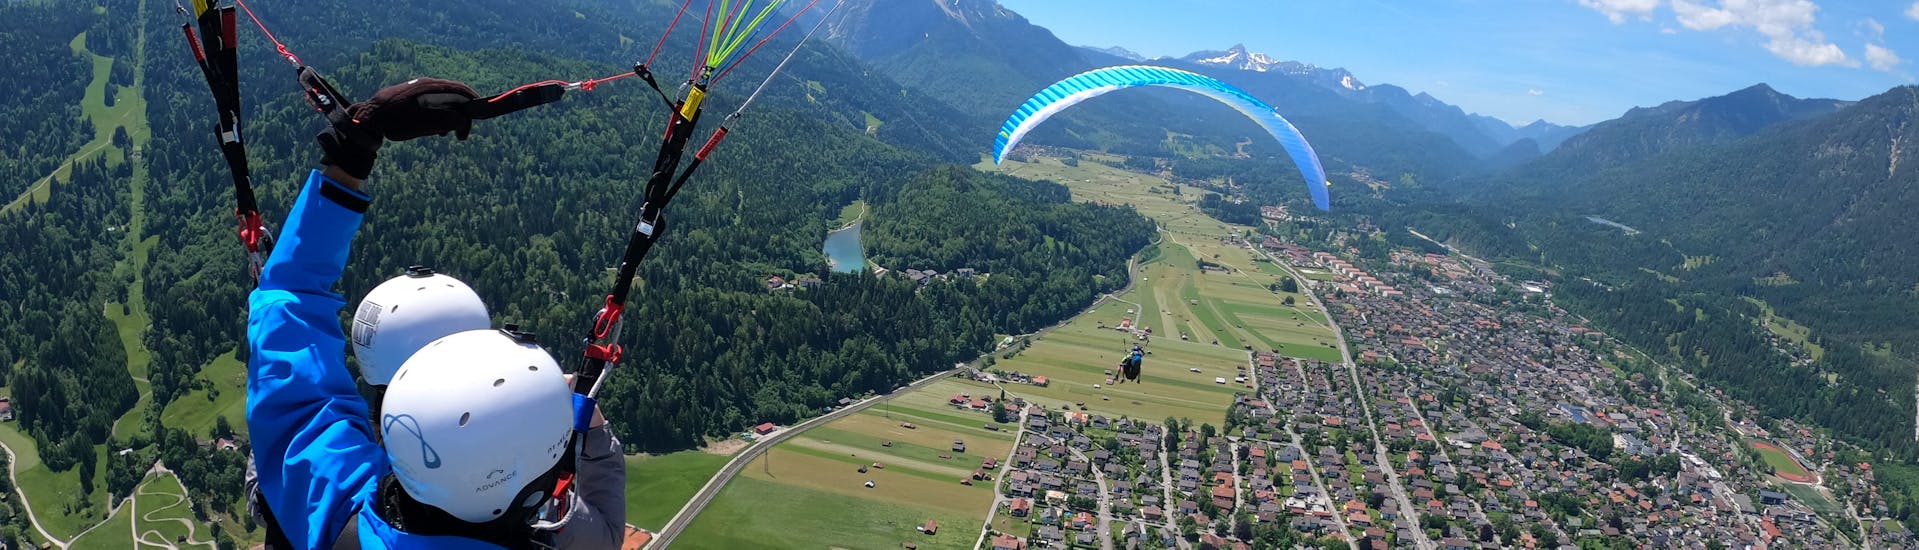 Picture of guide with a participant, flying in the air and enjoying the view during the Tandem Paragliding in Garmisch-Partenkirchen with Aerotaxi Garmisch-Partenkirchen.